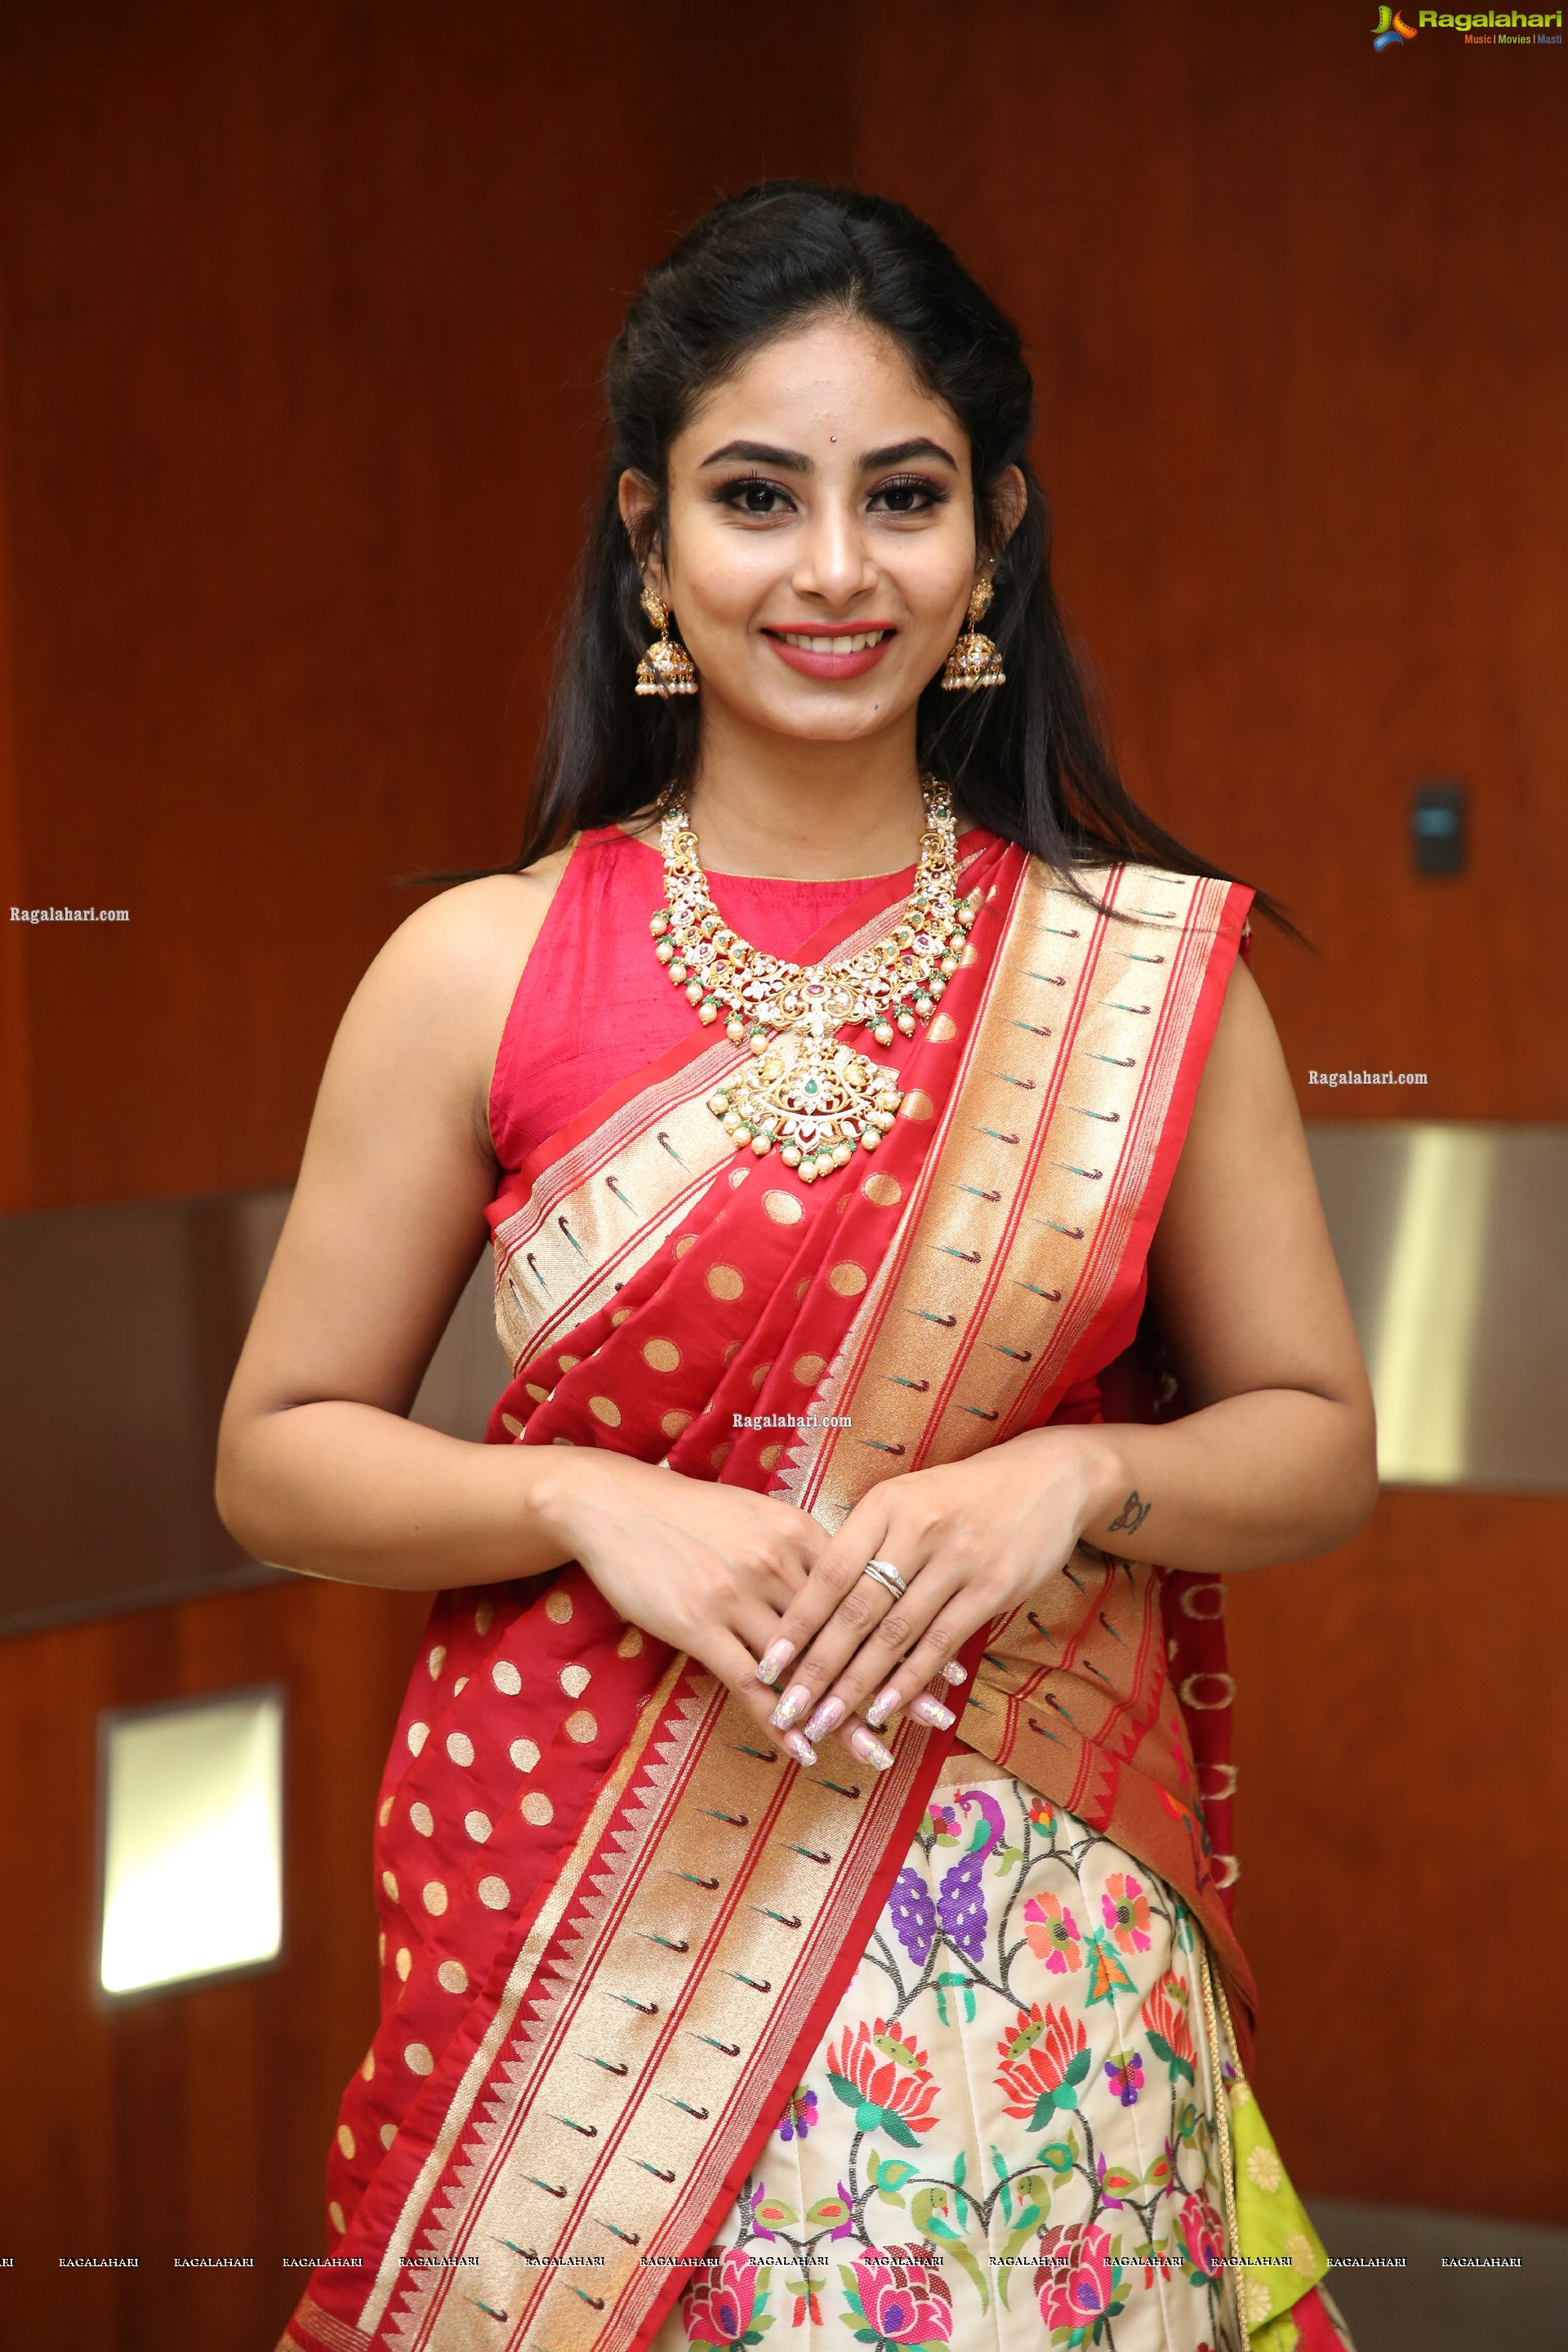 Honey Chowdary Poses With Contemporary Jewellery, HD Photo Gallery